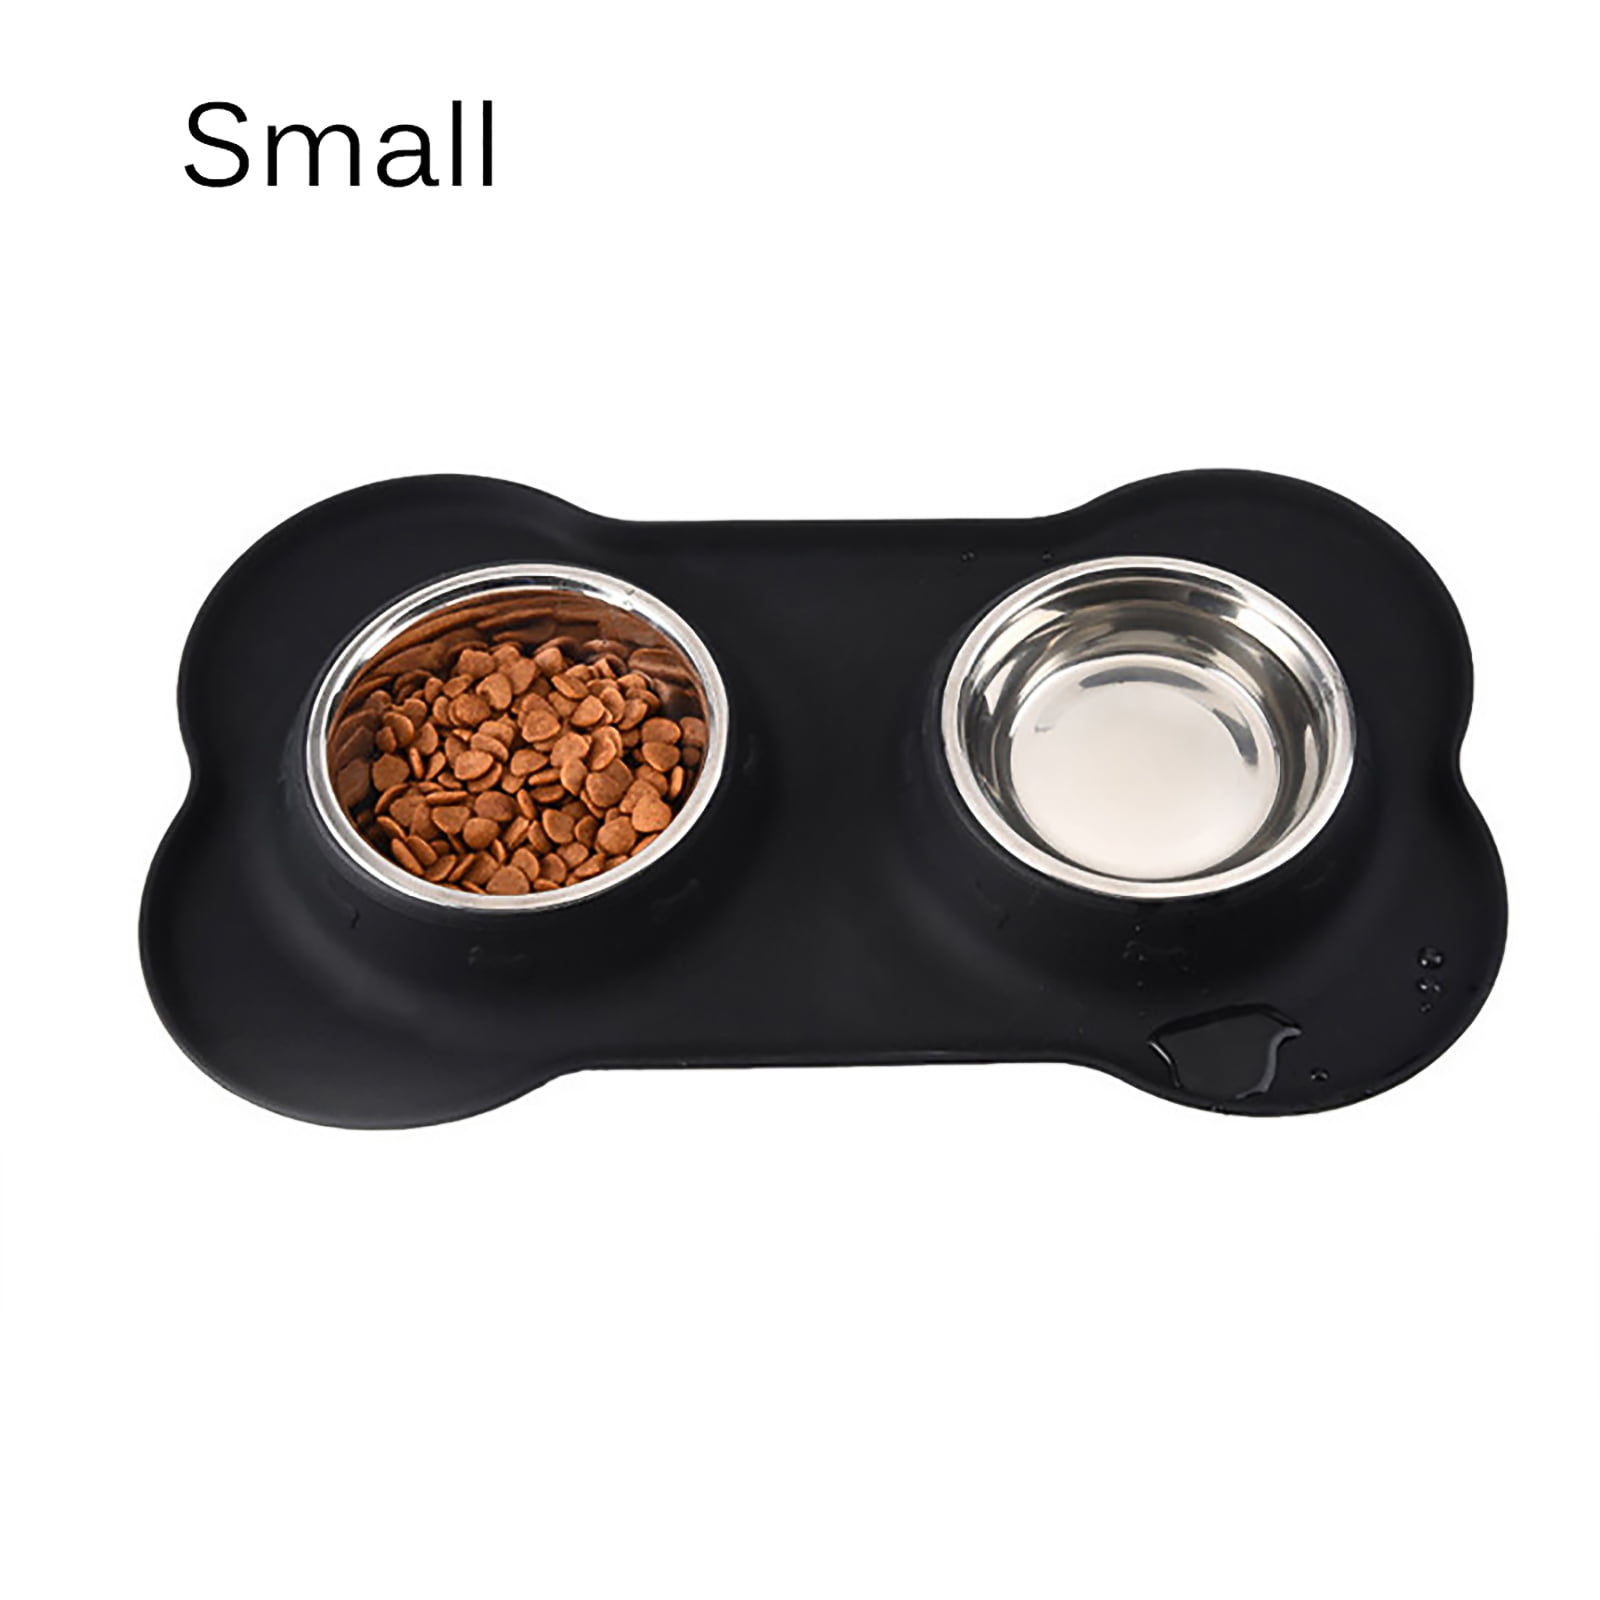 AsFrost Dog Food Bowls, 2 Stainless Steel Dog Food Water Bowl Set with No  Spill Non-Skid Silicone Dog Bowl Mat, Dog Dishes for M